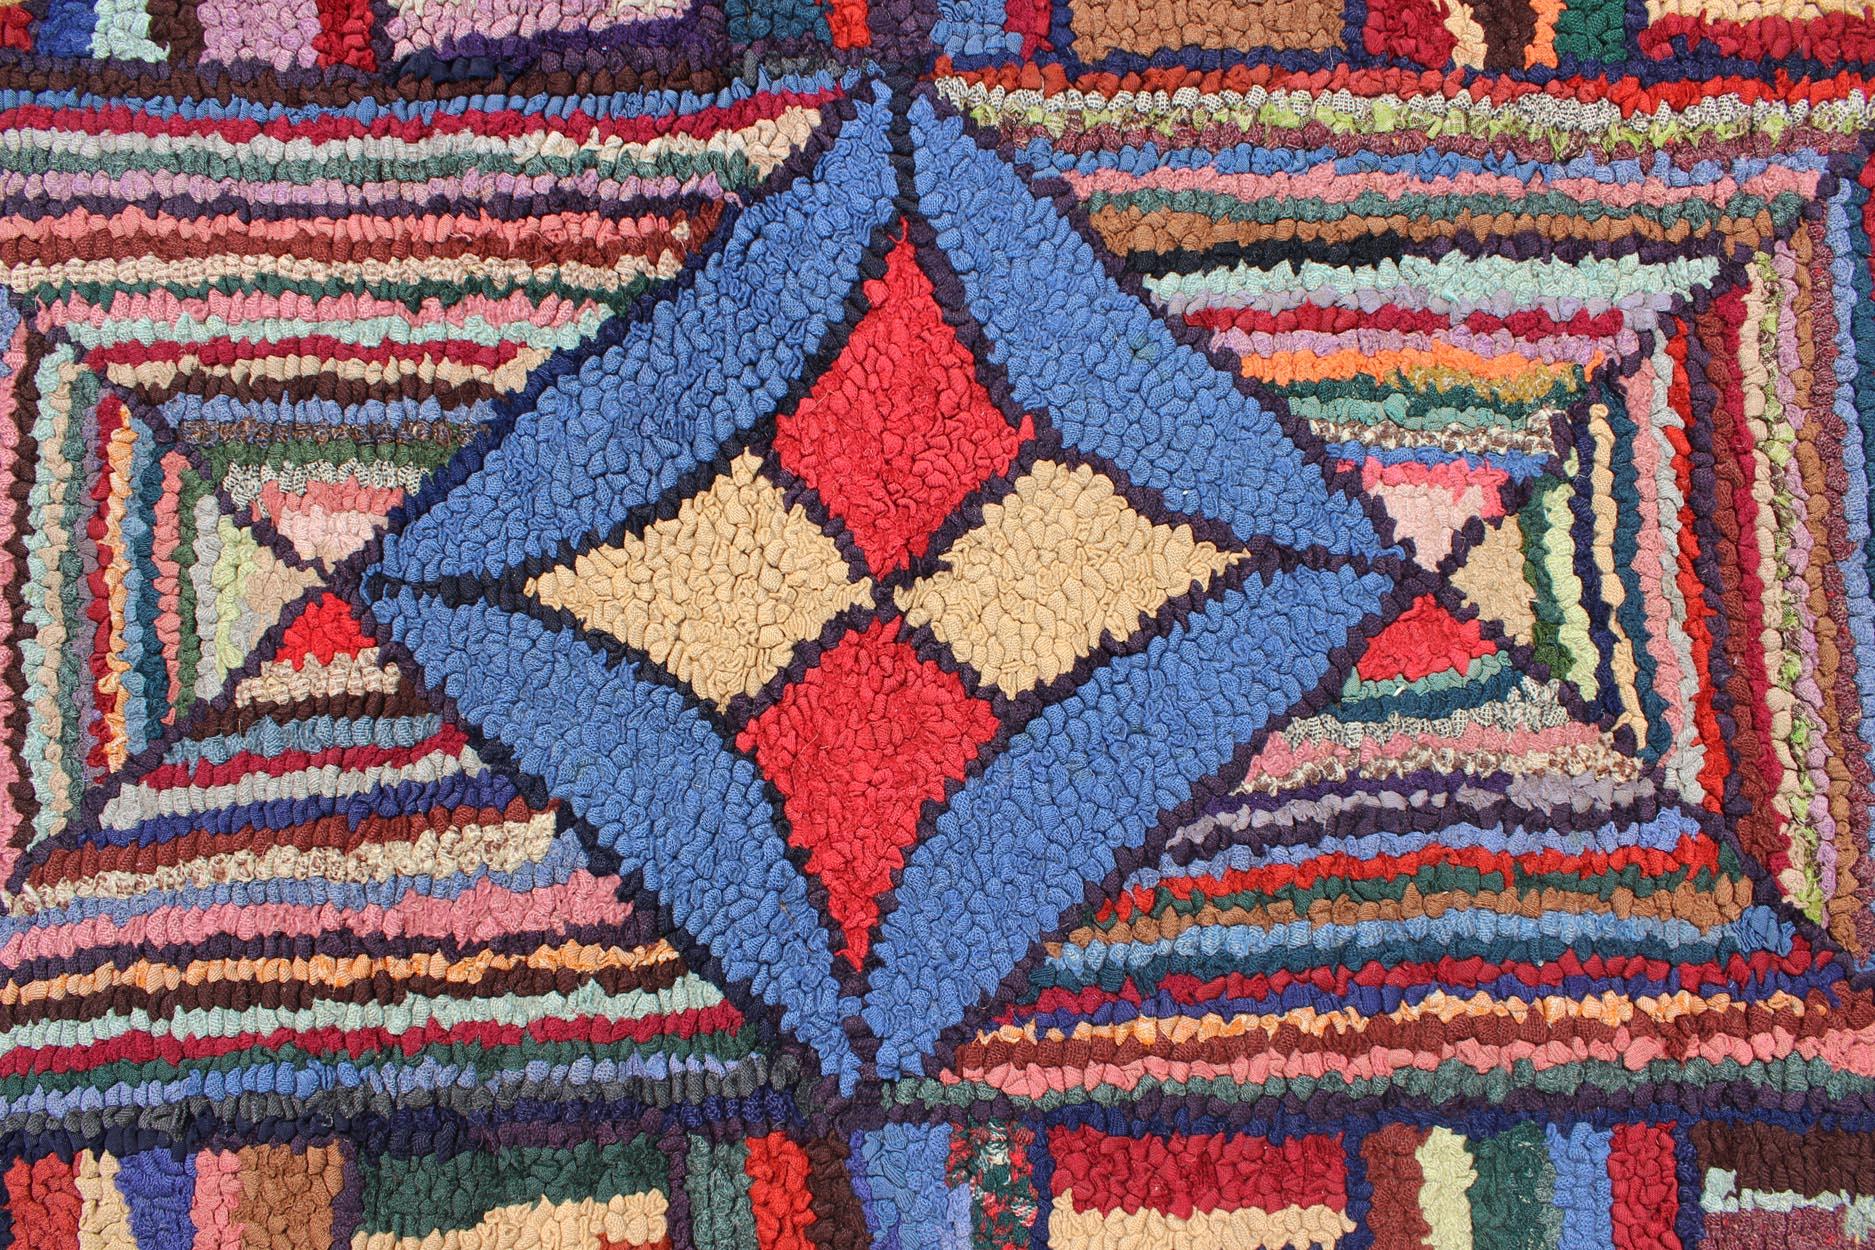 20th Century Antique American Hooked Rug with Colorful Geometric Design with Striped Border